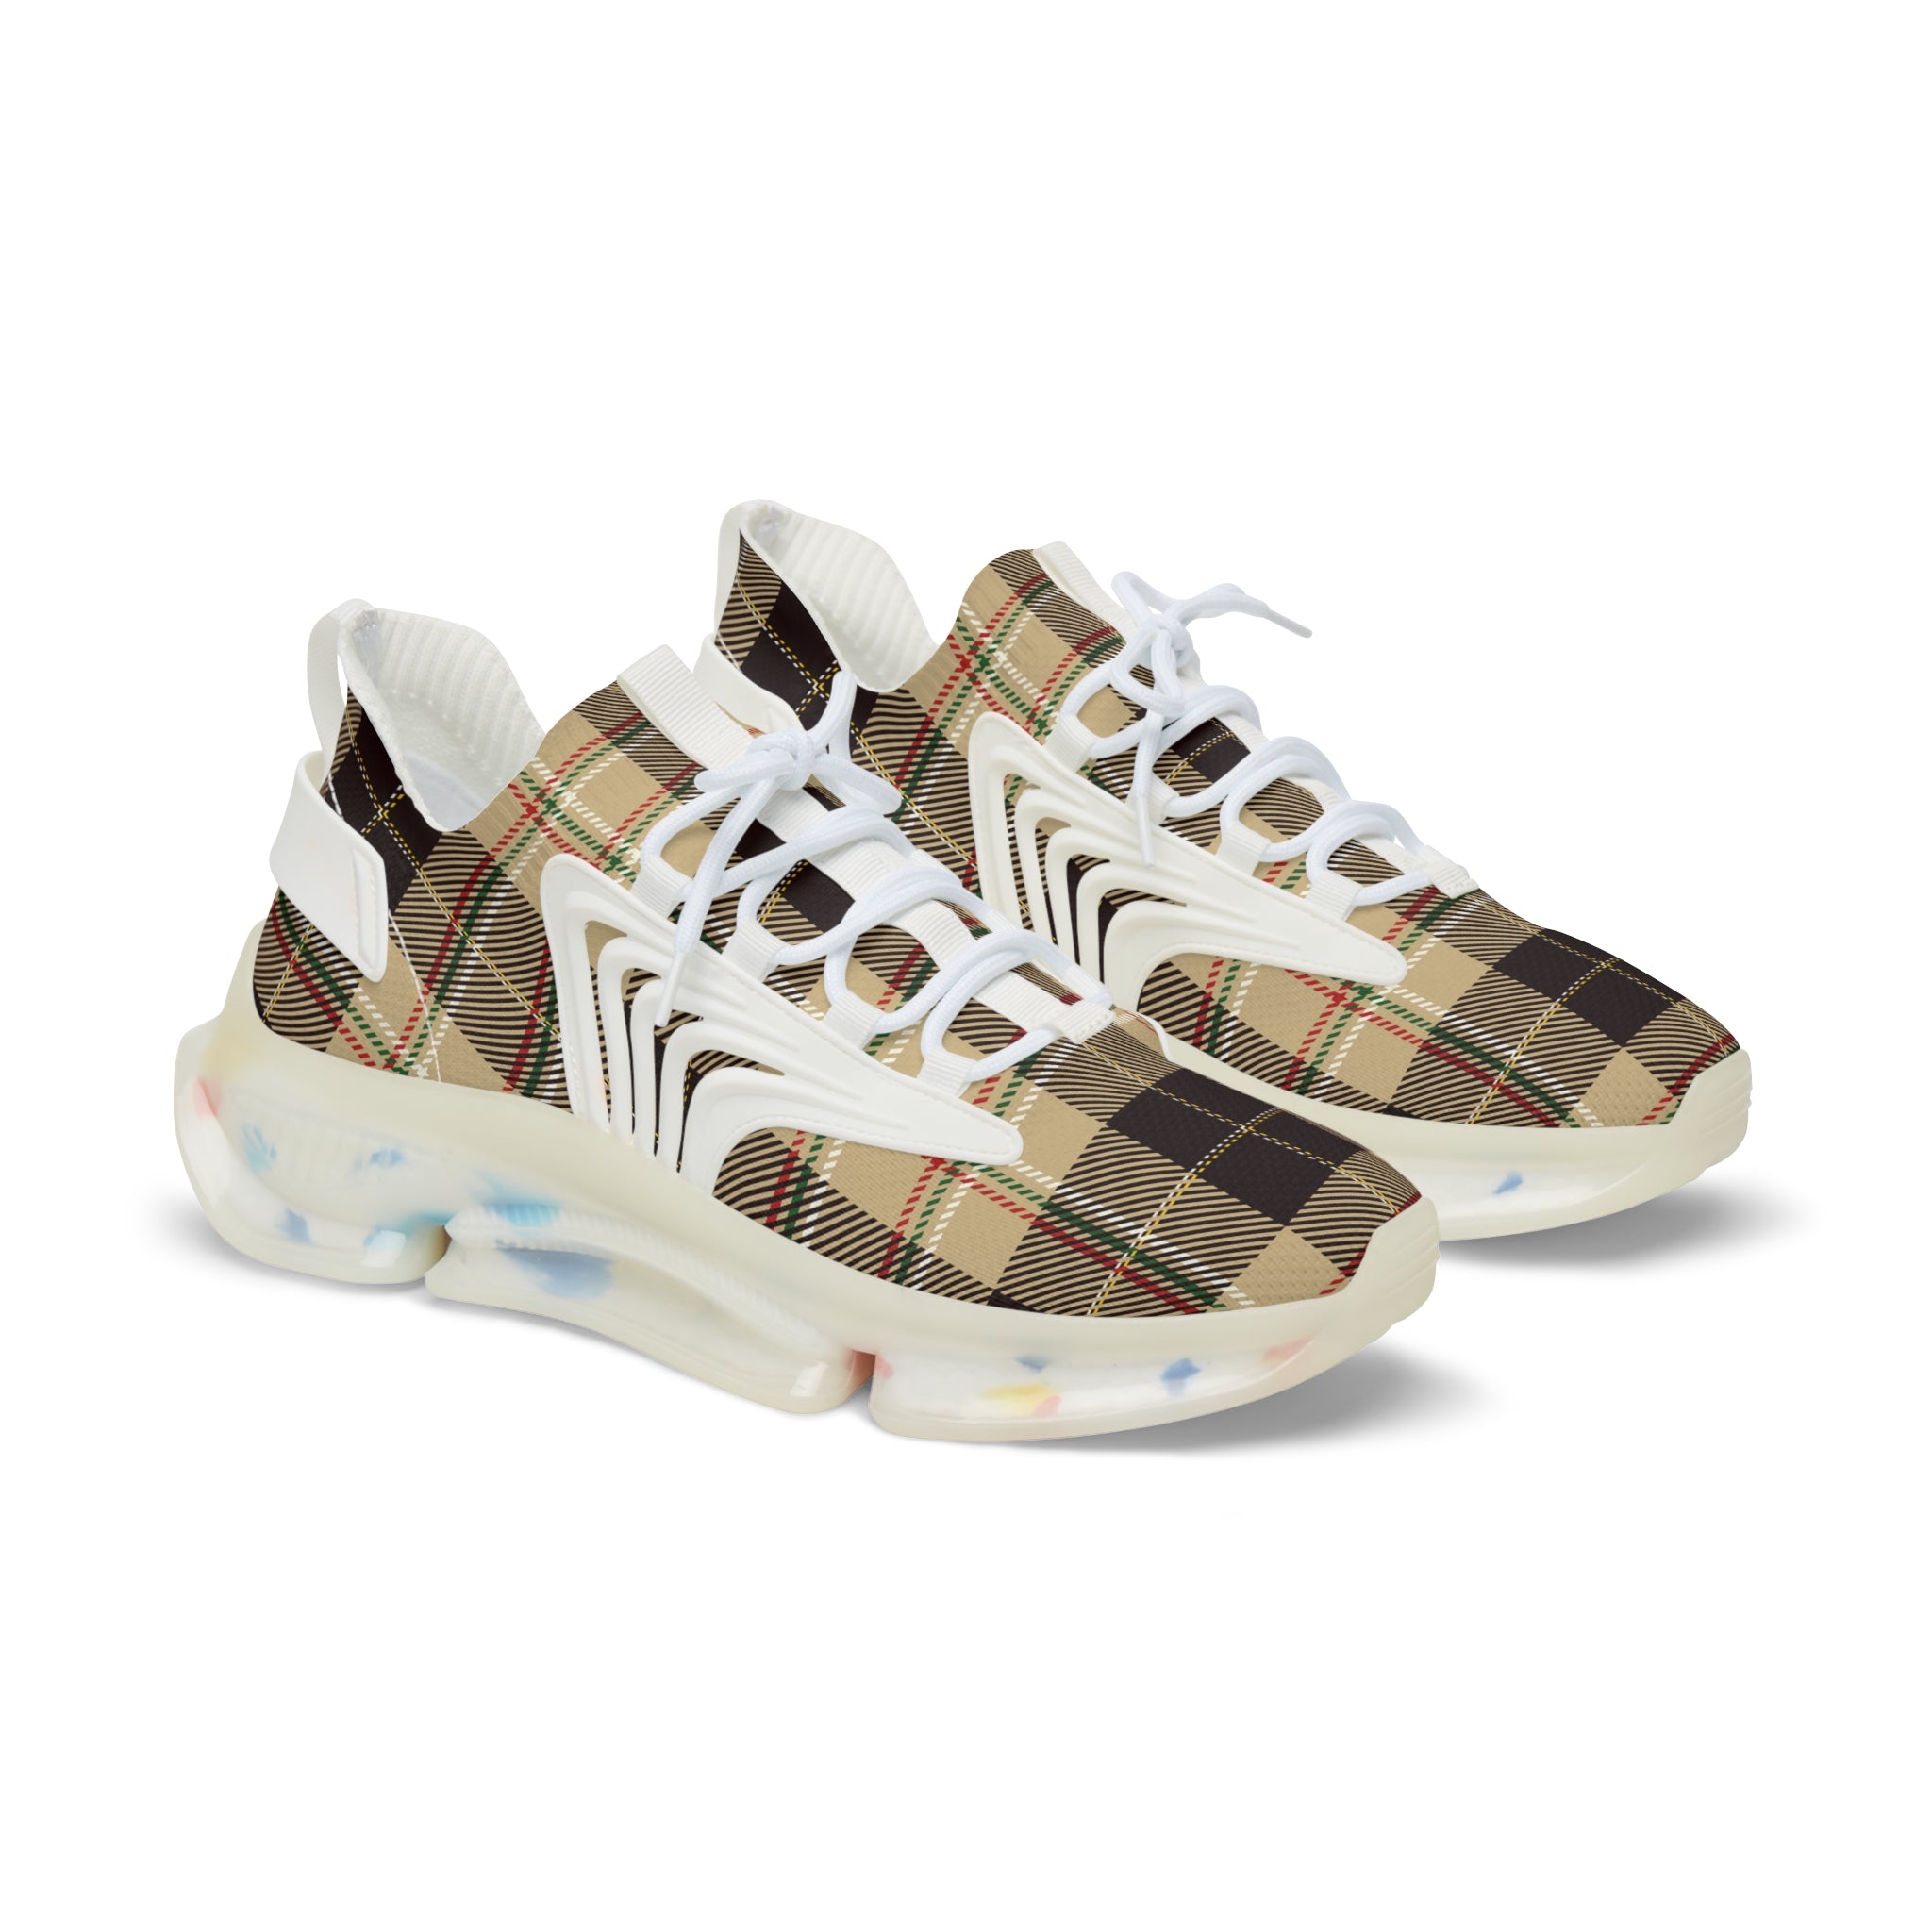 Groove Collection Dark Brown Plaid Men's Mesh Sneakers with Black or White Sole